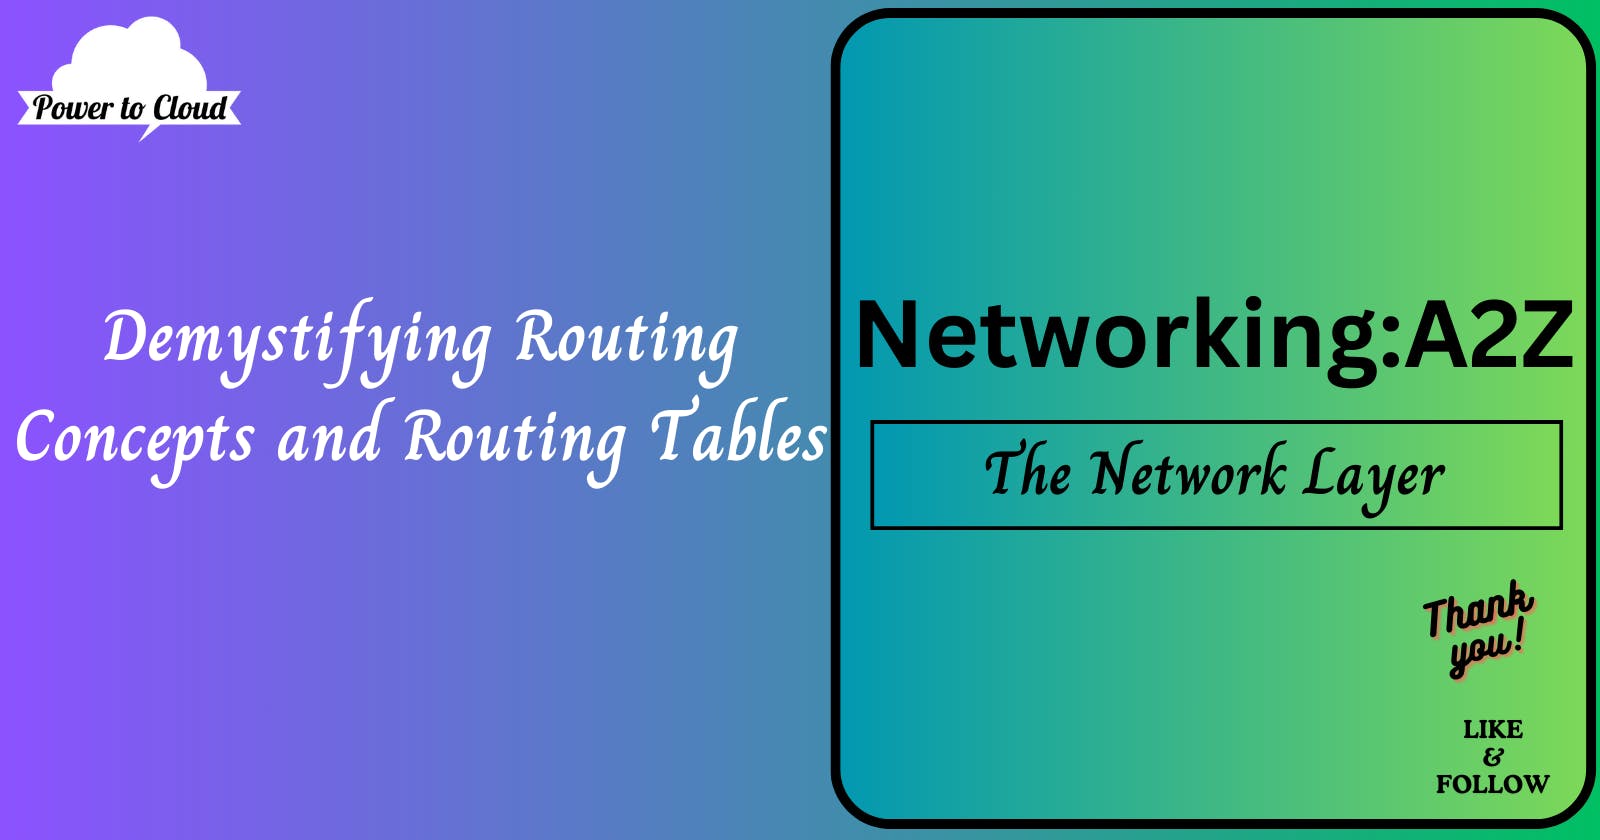 2.5 Demystifying Routing Concepts and Routing Tables